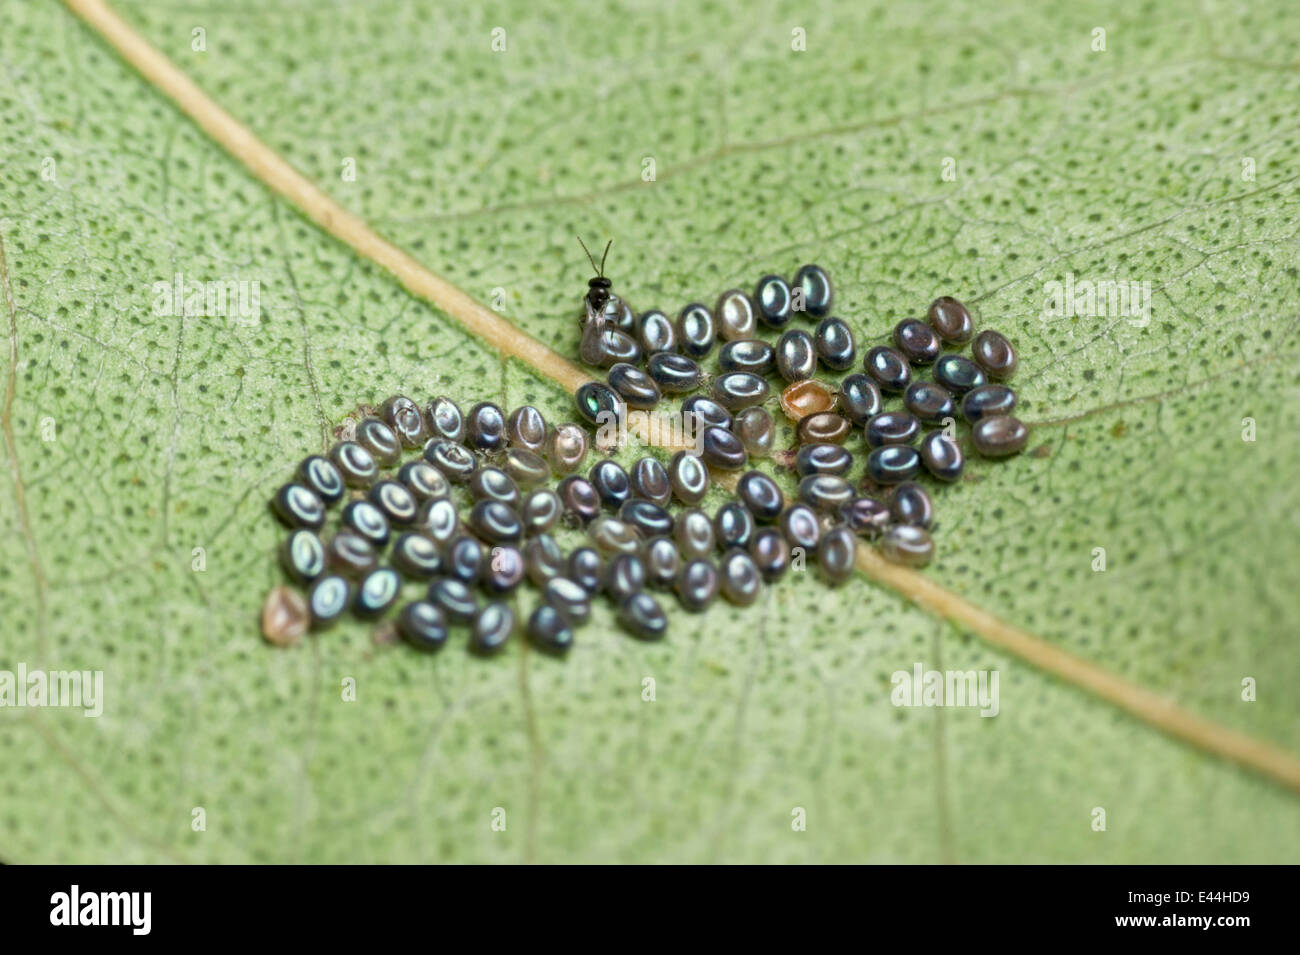 Autumn gum moth eggs and parasitic wasp Stock Photo